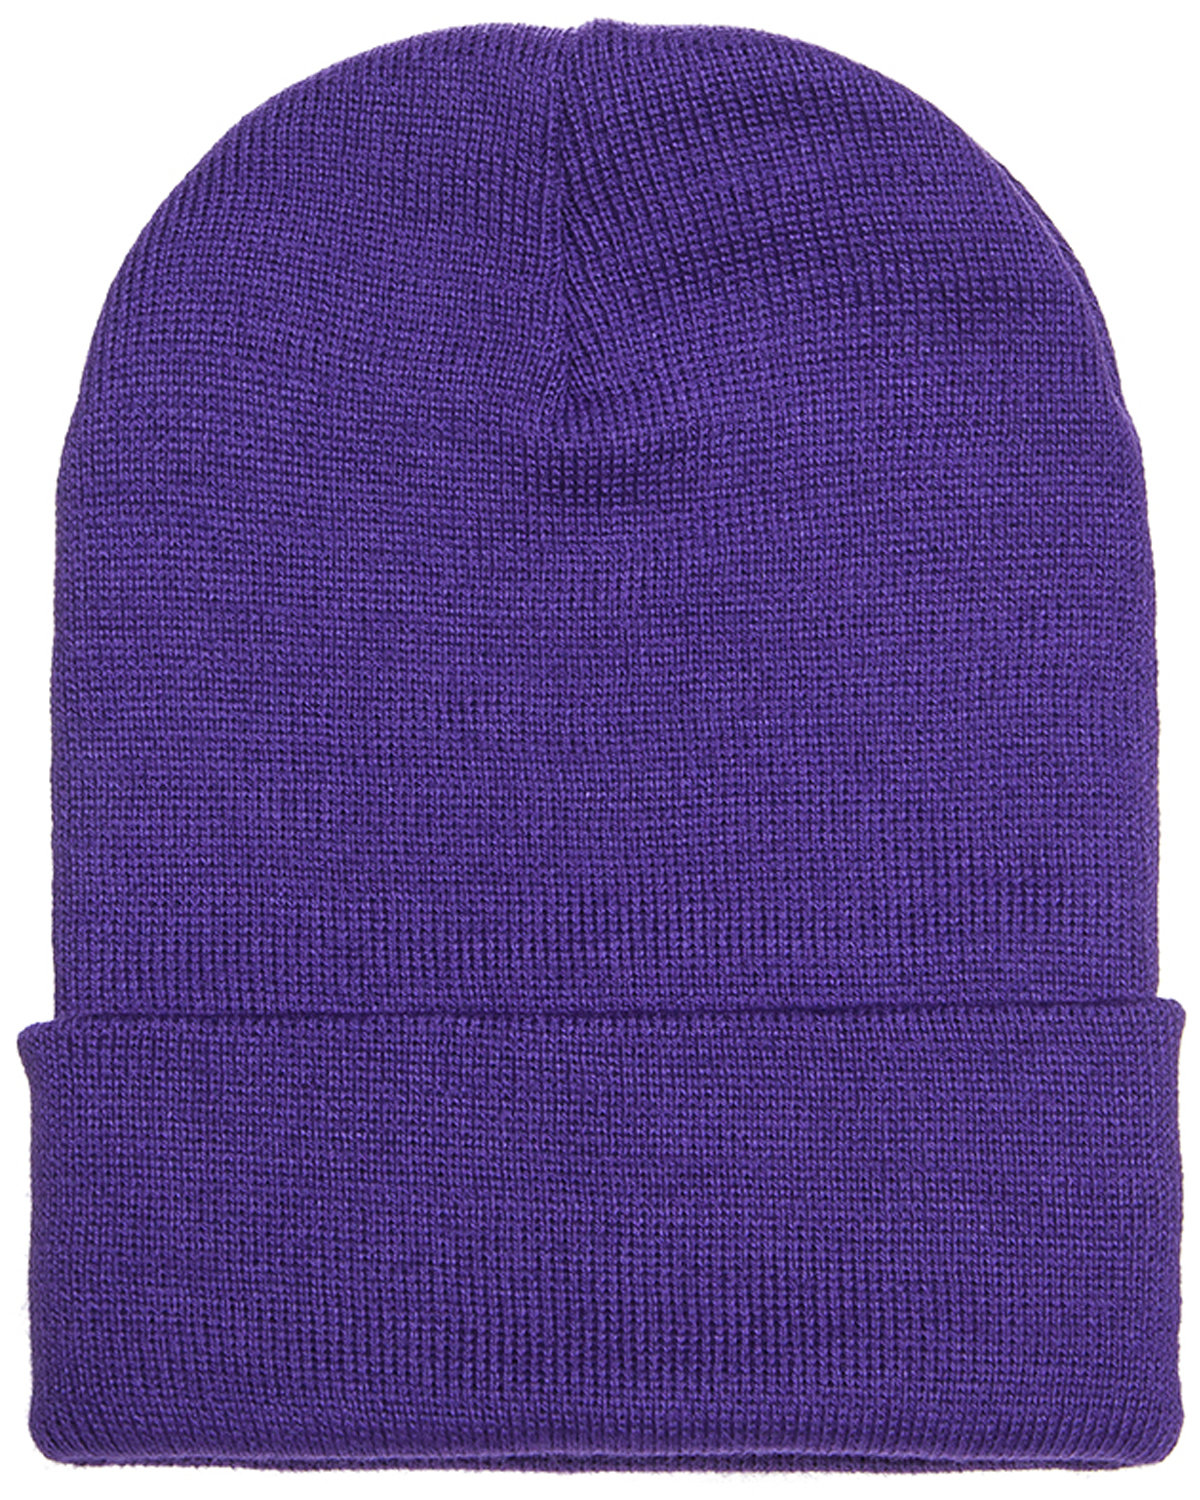 Yupoong Adult Cuffed Knit Beanie | alphabroder